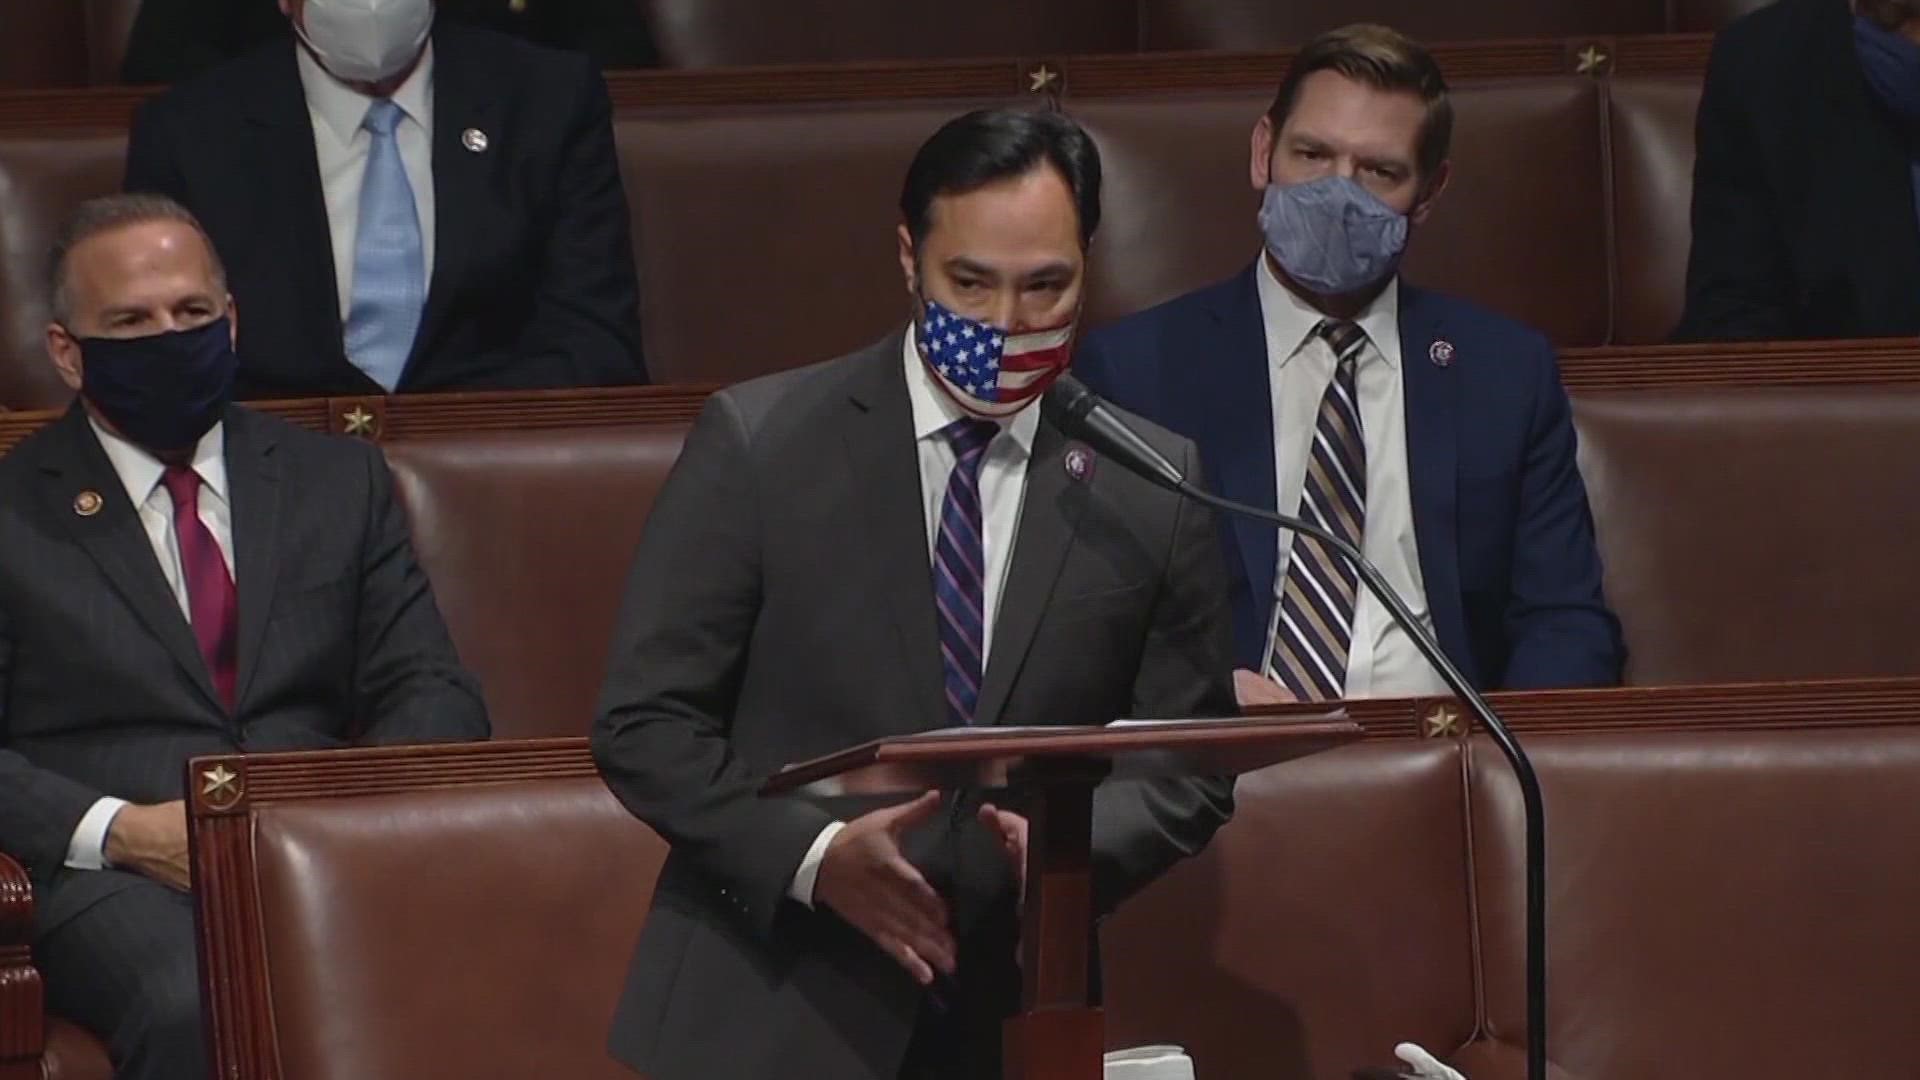 Rep. Joaquin Castro praised the president for his visit to the Texas/Mexico border Sunday.